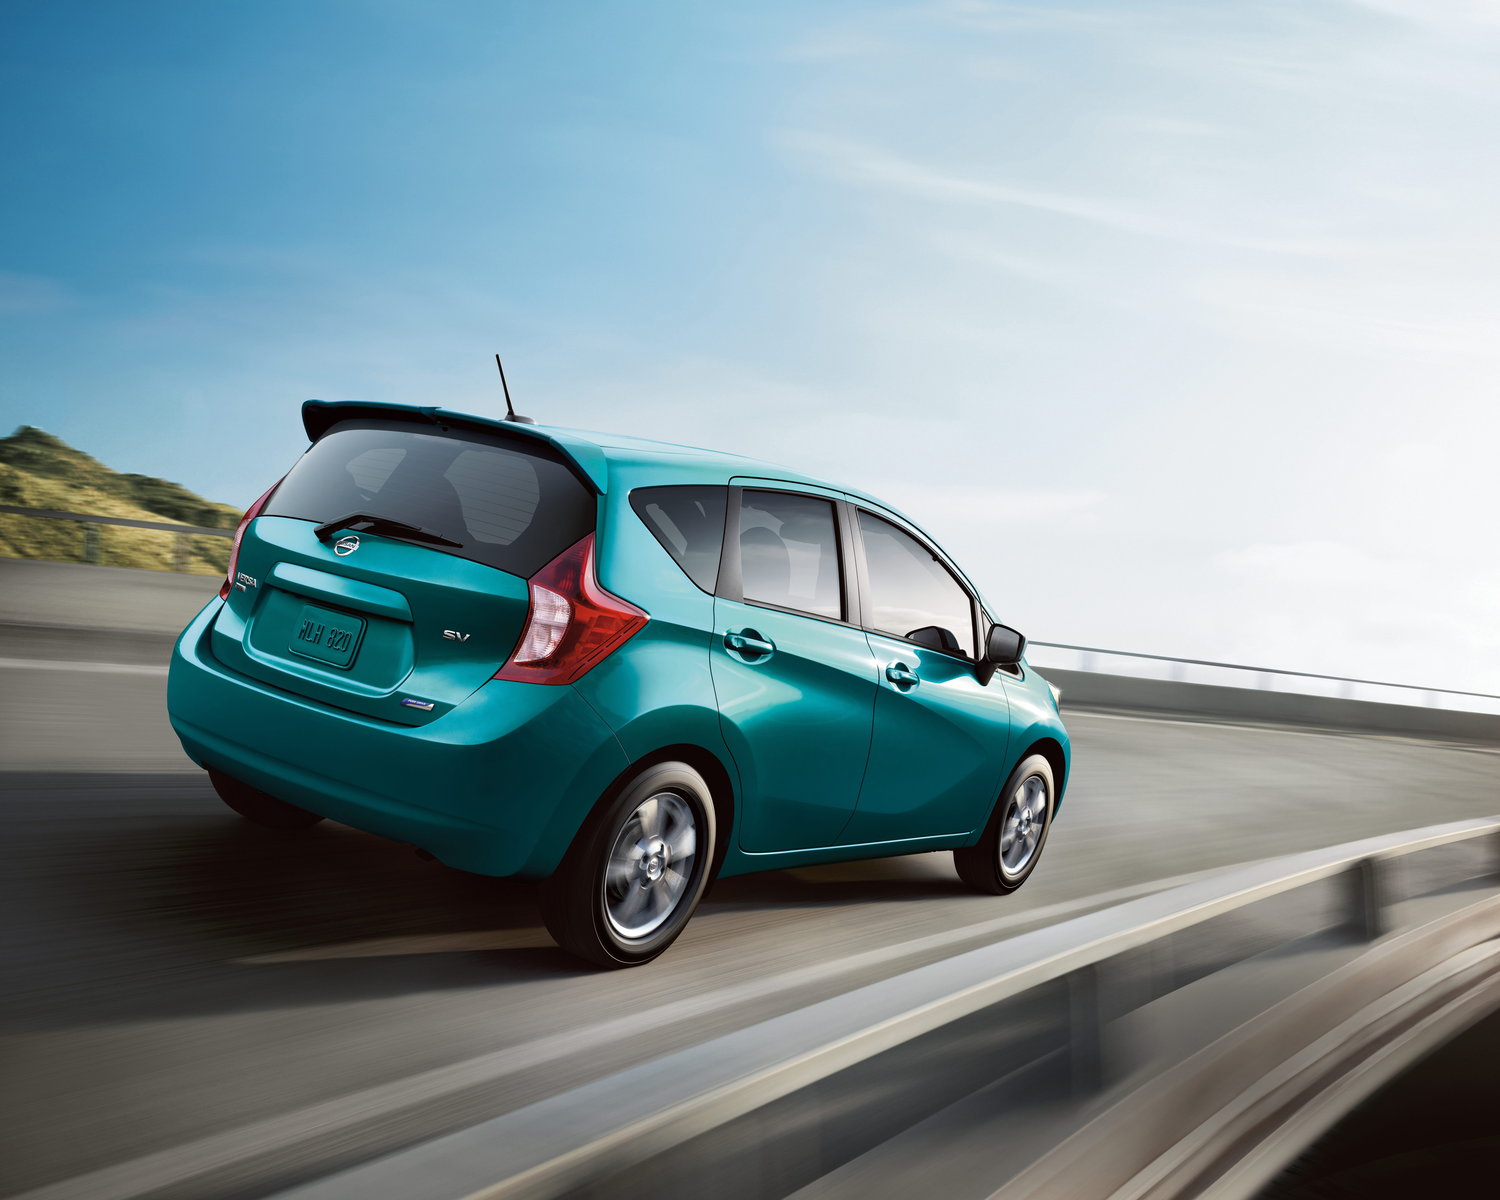 2017 Nissan Versa Note: Preview, Pricing, Release Date